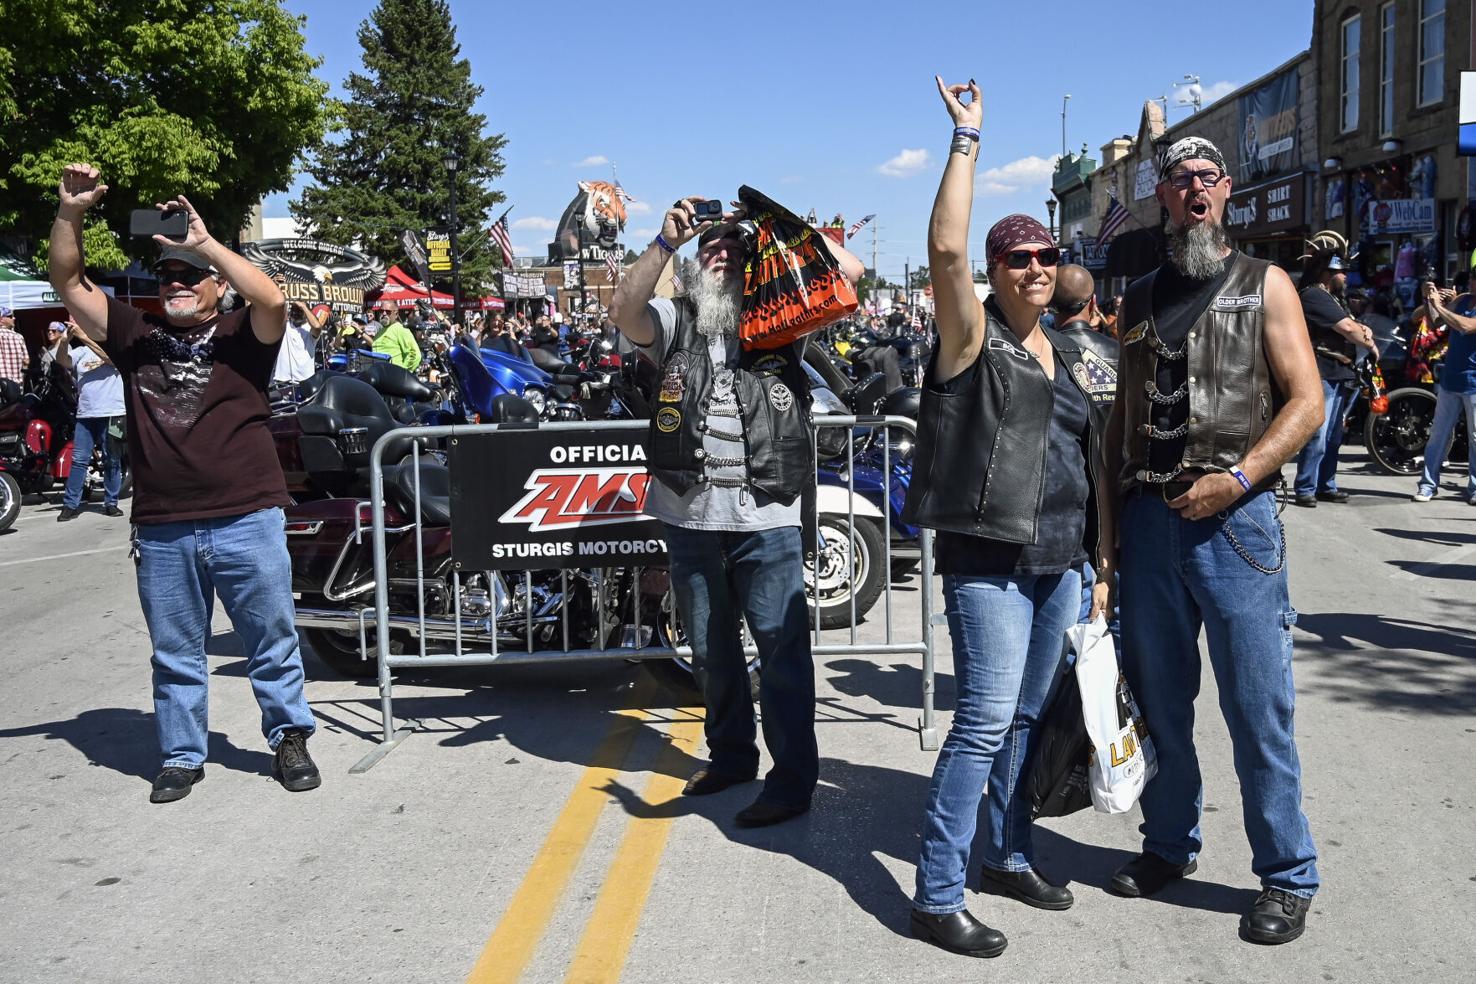 PHOTOS and VIDEO Rally goers brave the heat as Sturgis Motorcyle Rally continues